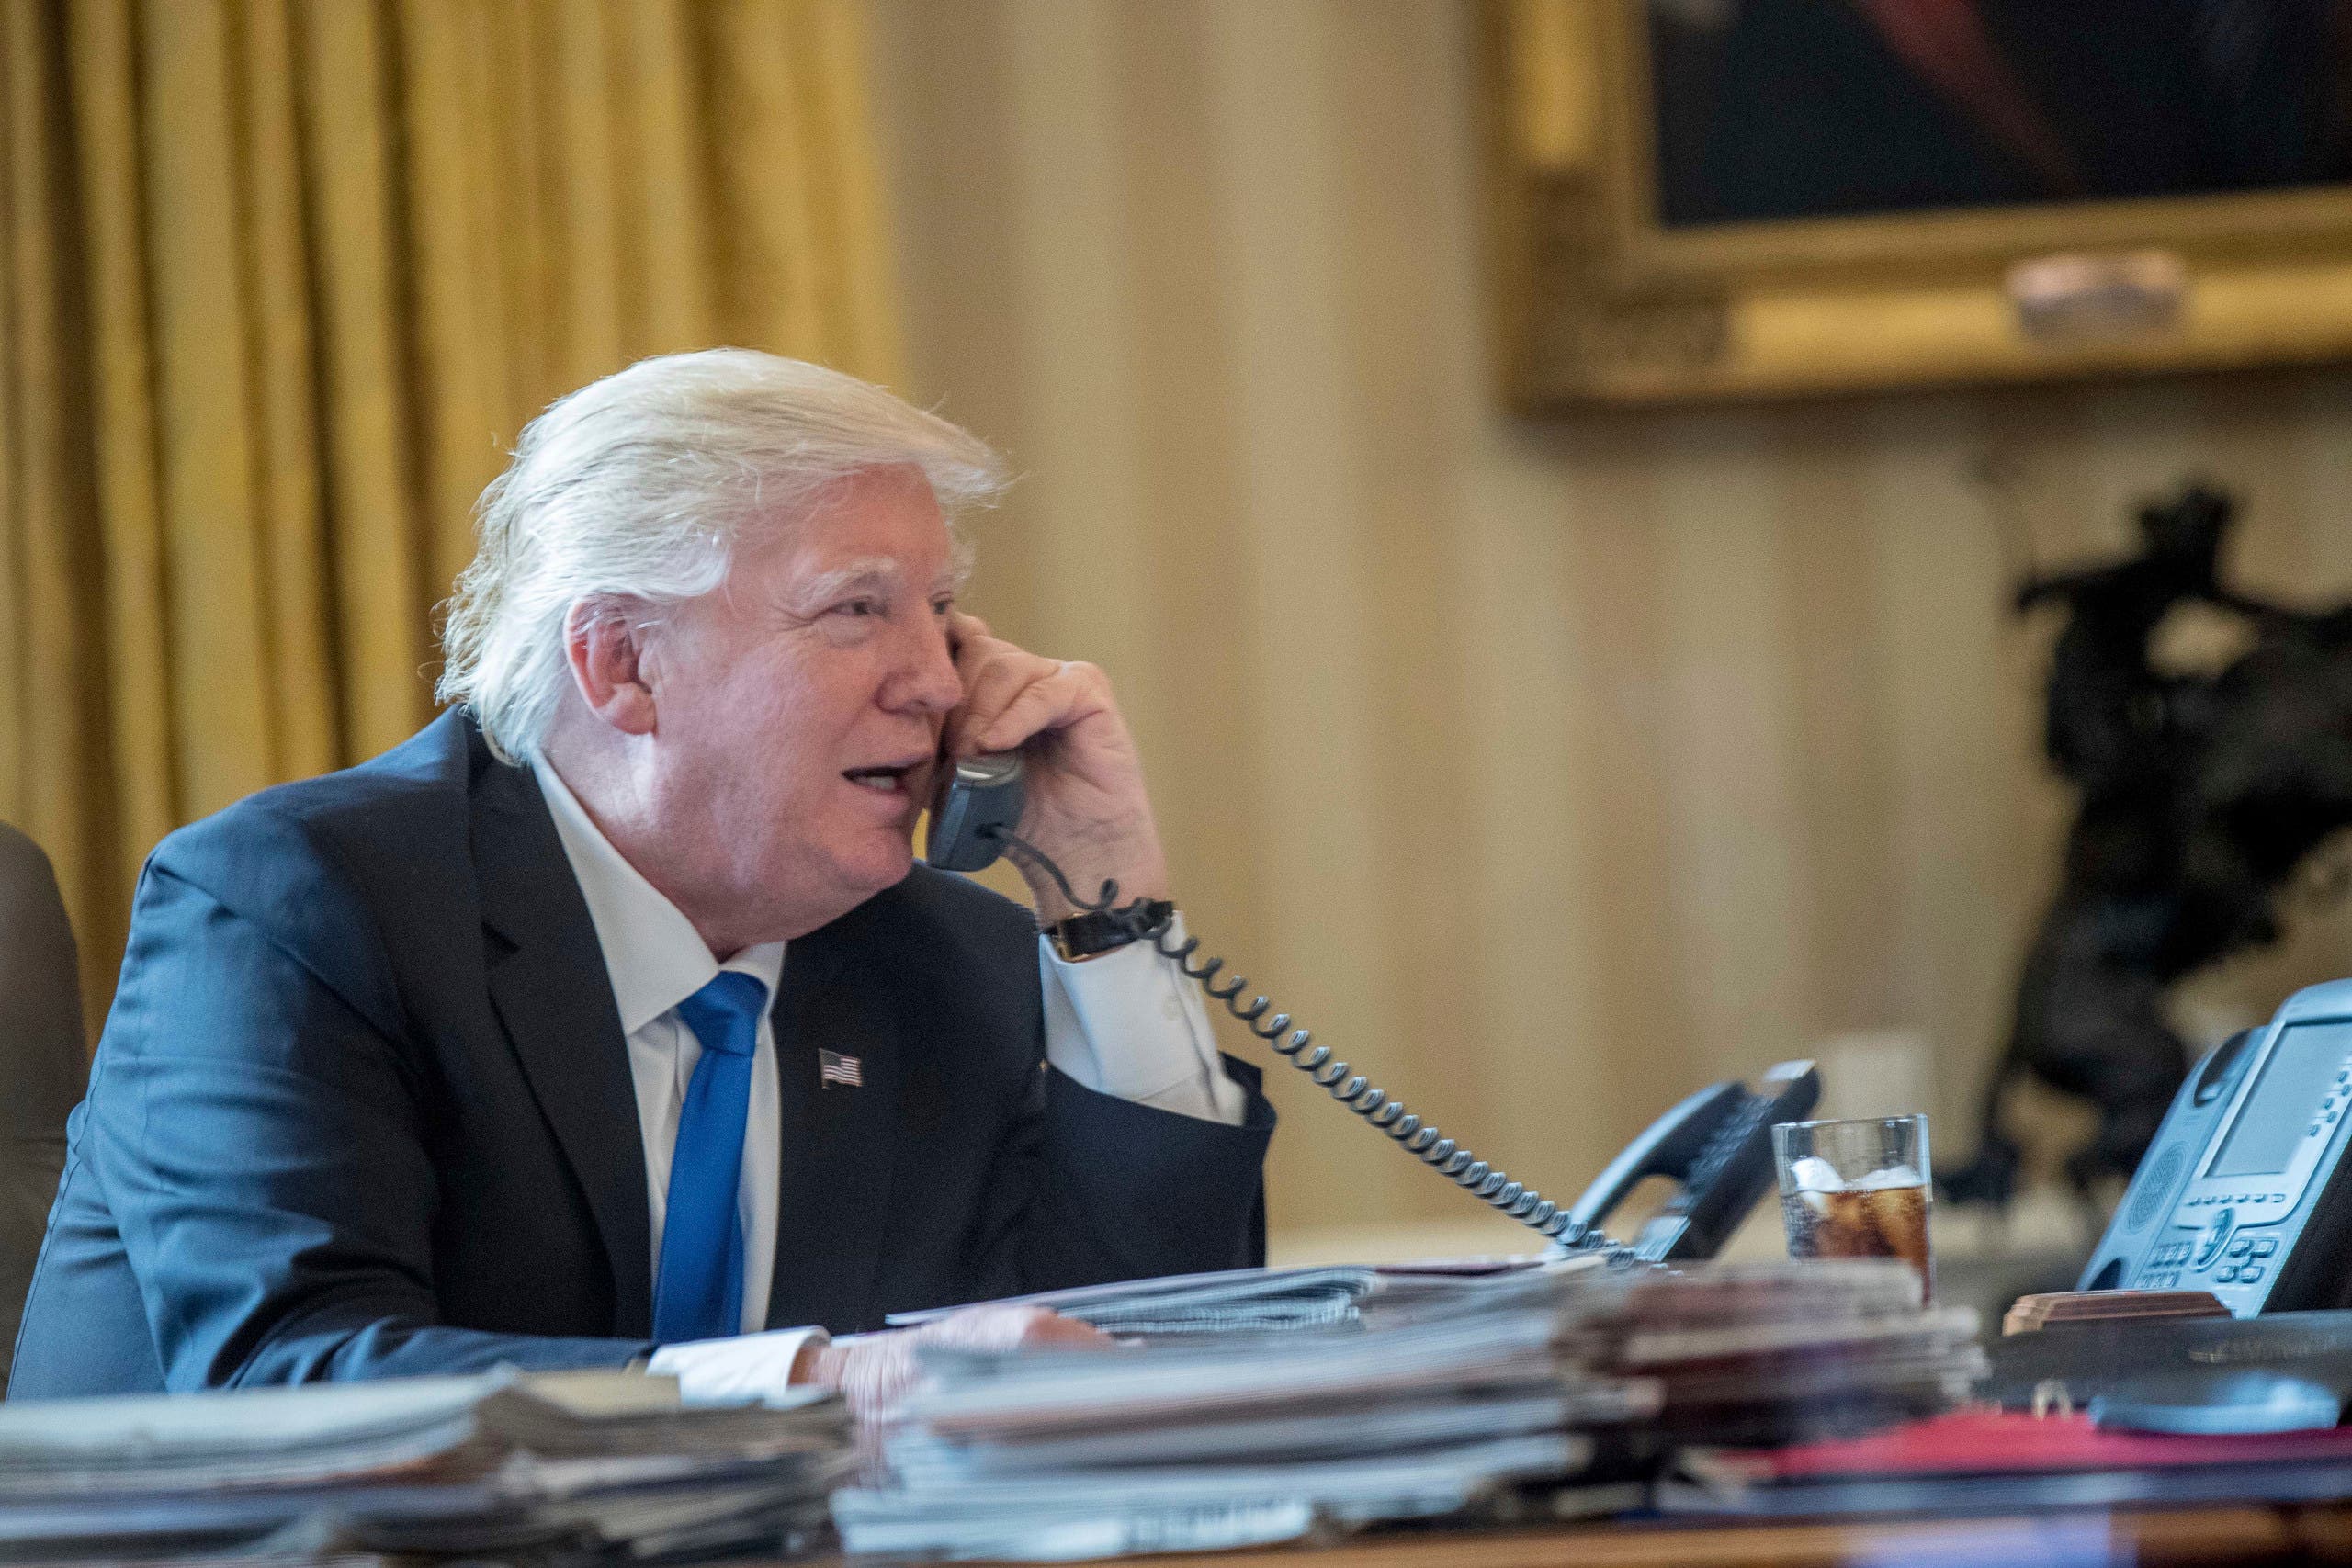  President Donald Trump speaks on the phone with Russian President Vladimir Putin, Saturday, Jan. 28, 2017, in the Oval Office at the White House in Washington. (AP Photo/Andrew Harnik)